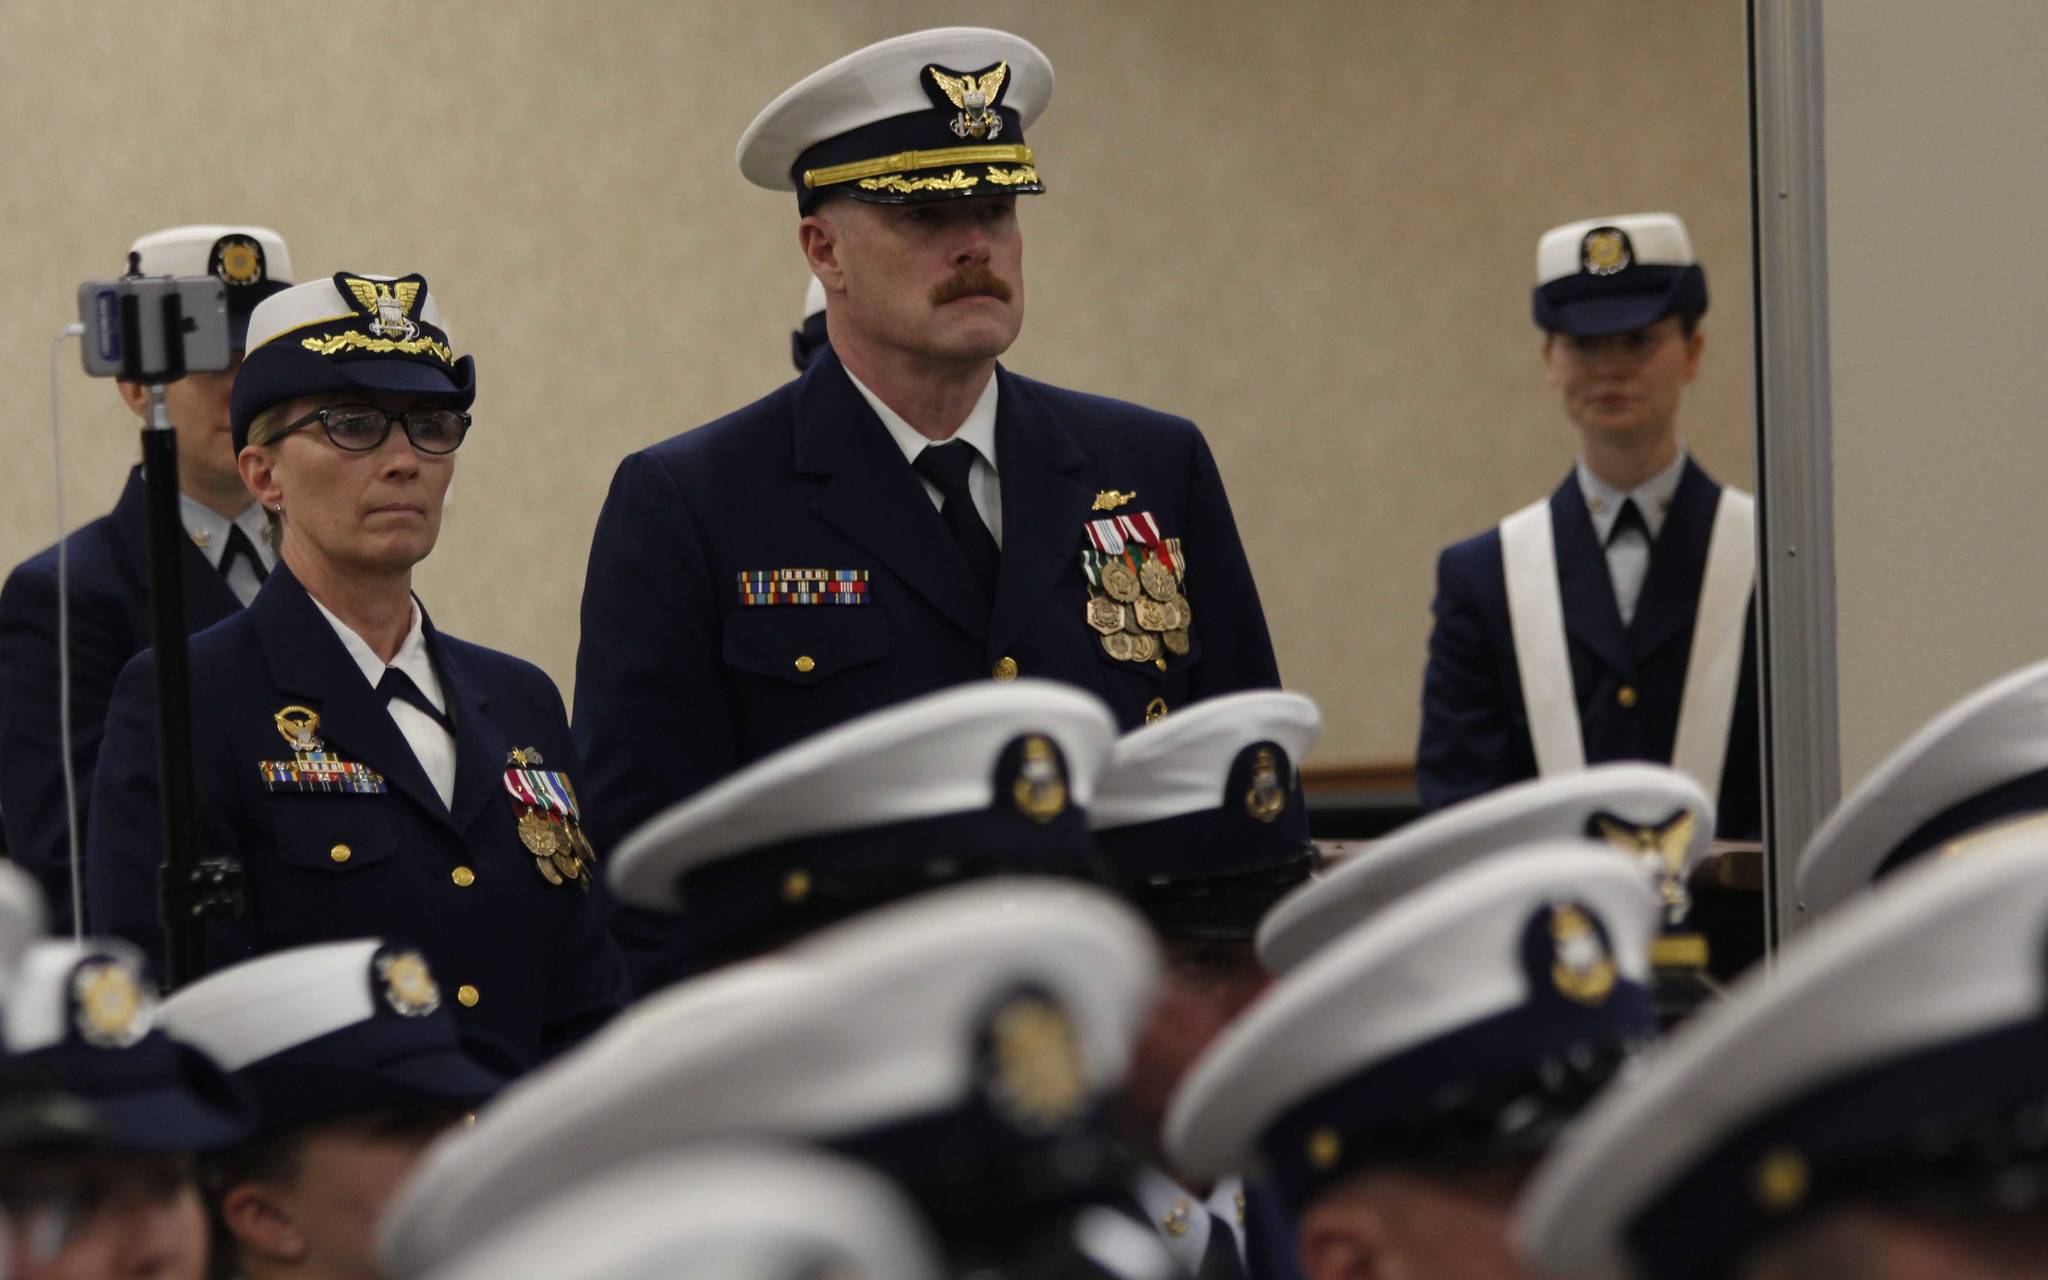 Capt. Shannan Greene (left) stands next to Capt. Phillip Thorne (center) prior to a change of command ceremony Friday. Greene transferred her command of Sector Juneau to Thorne. (Alex McCarthy | Juneau Empire)